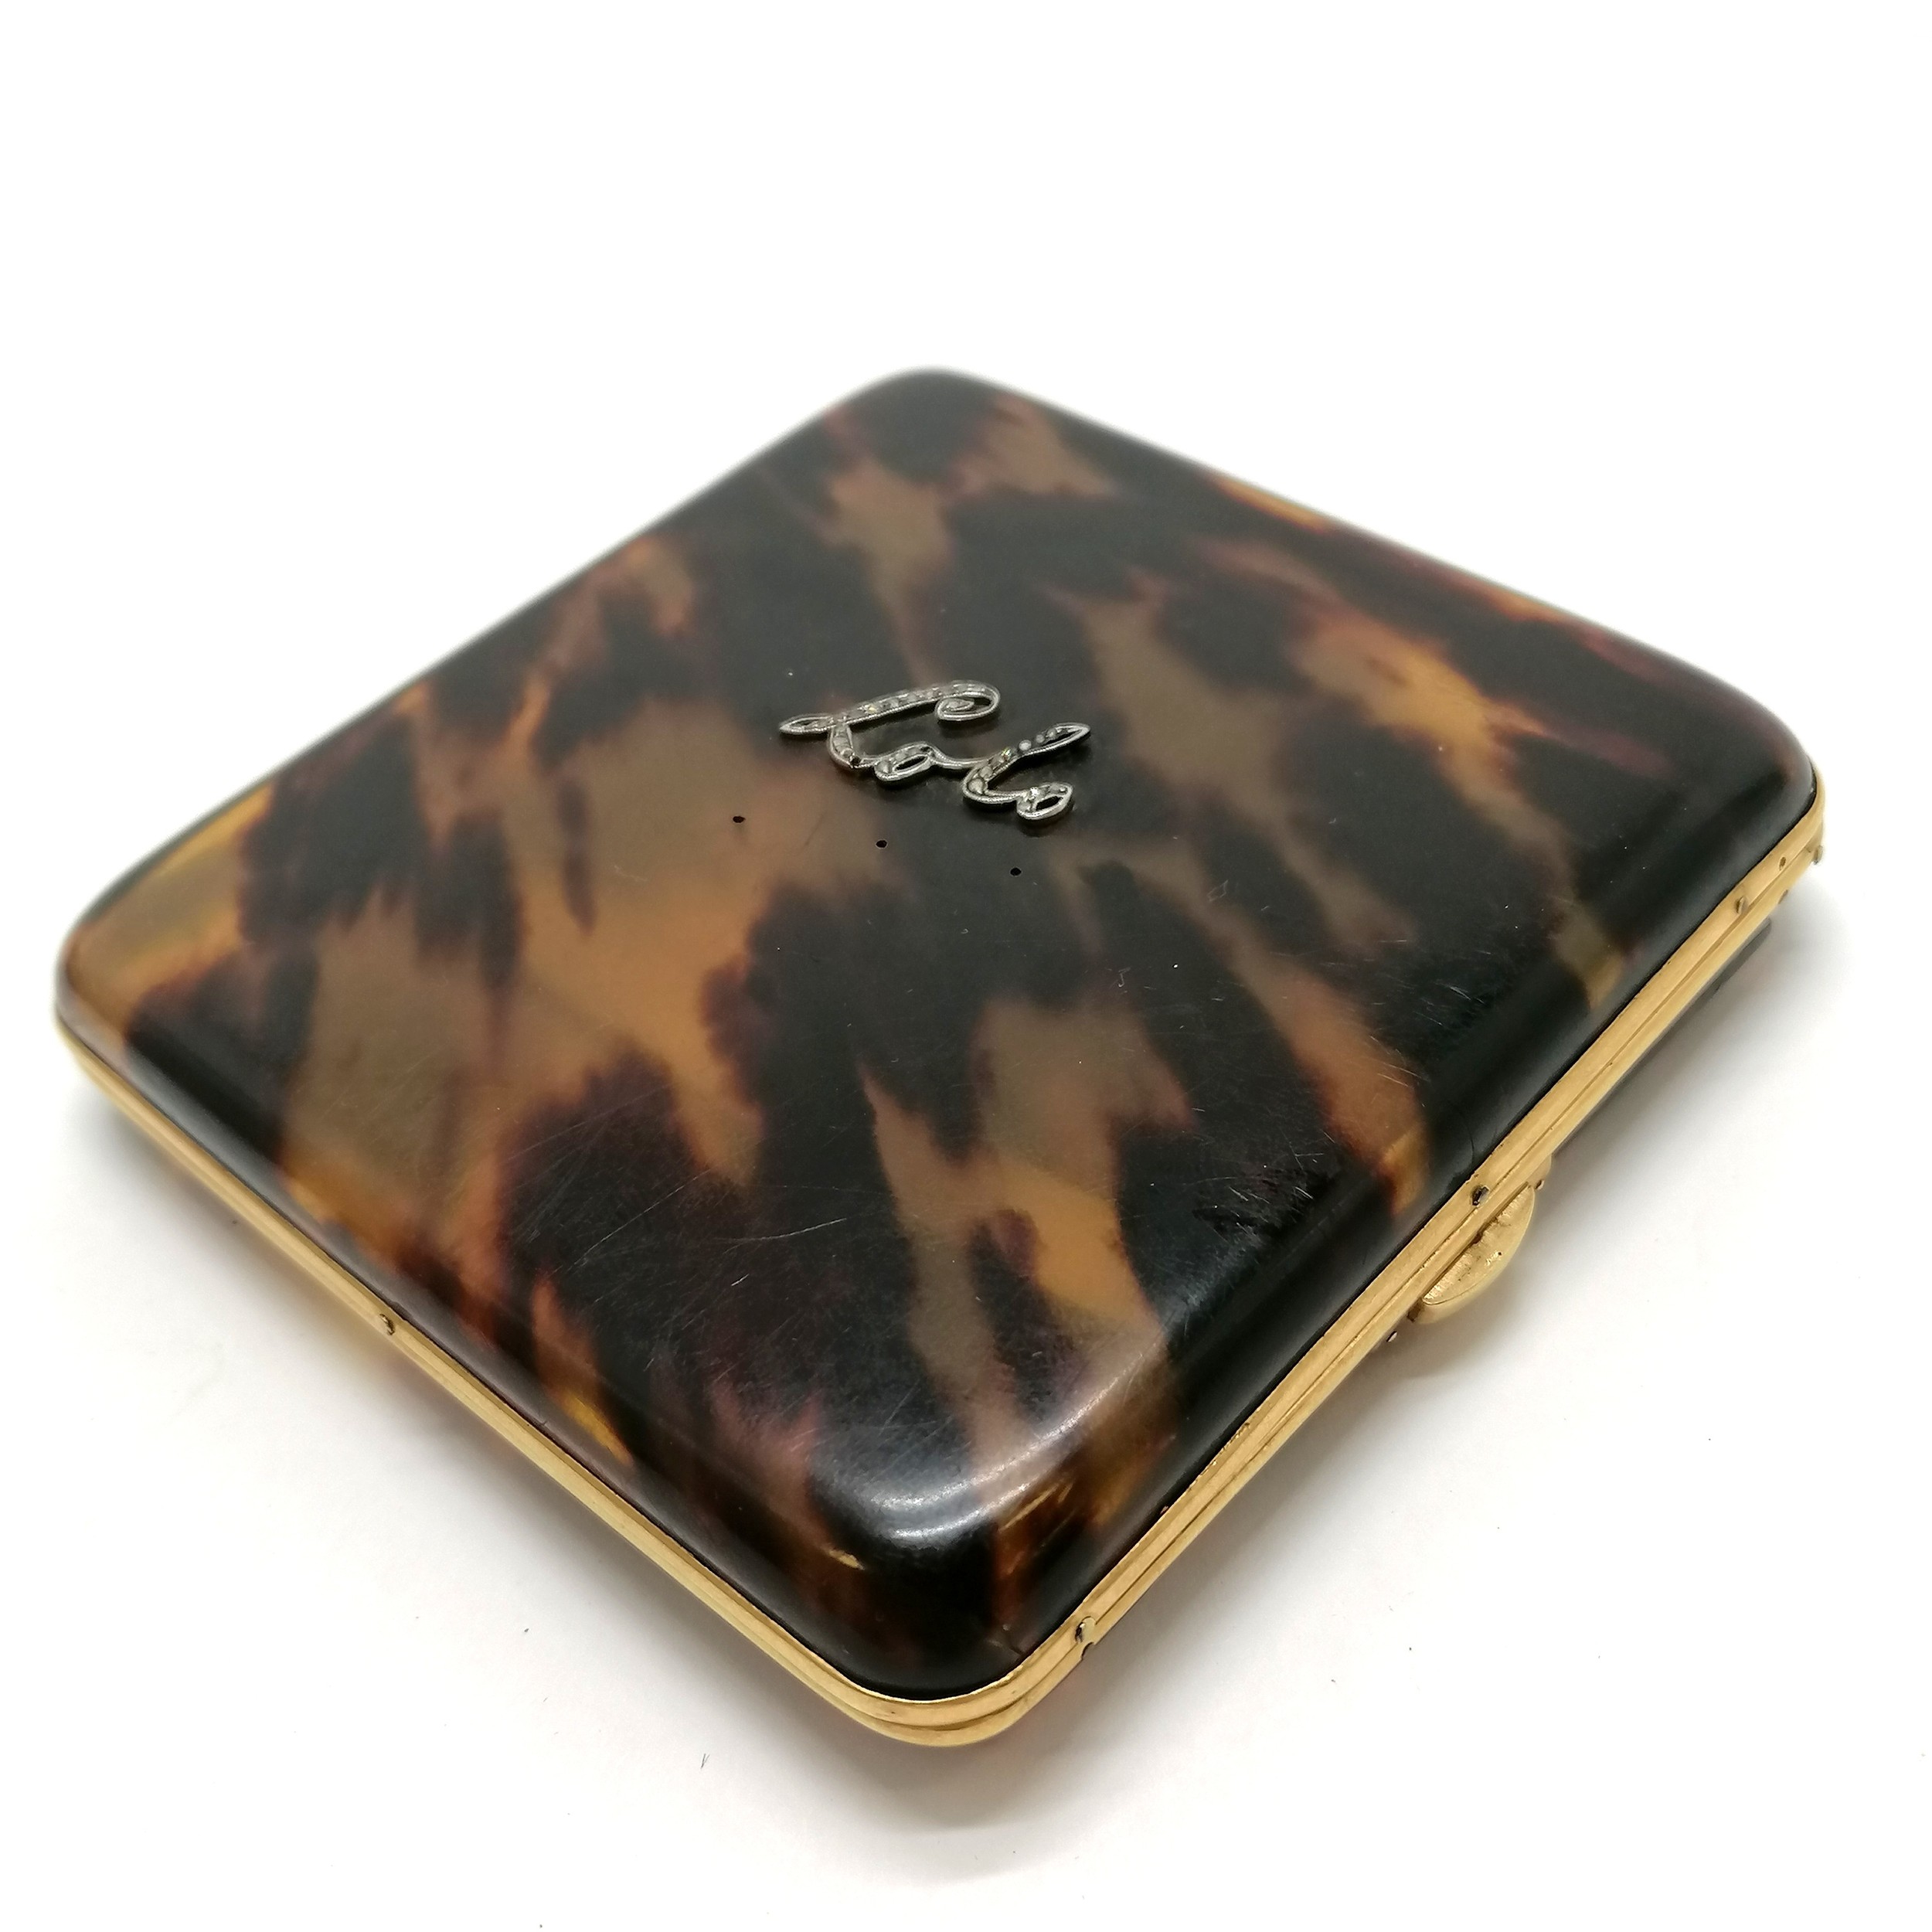 Antique 18ct marked gold mock tortoiseshell cigarette case (a/f to reverse with losses) with diamond - Image 3 of 3